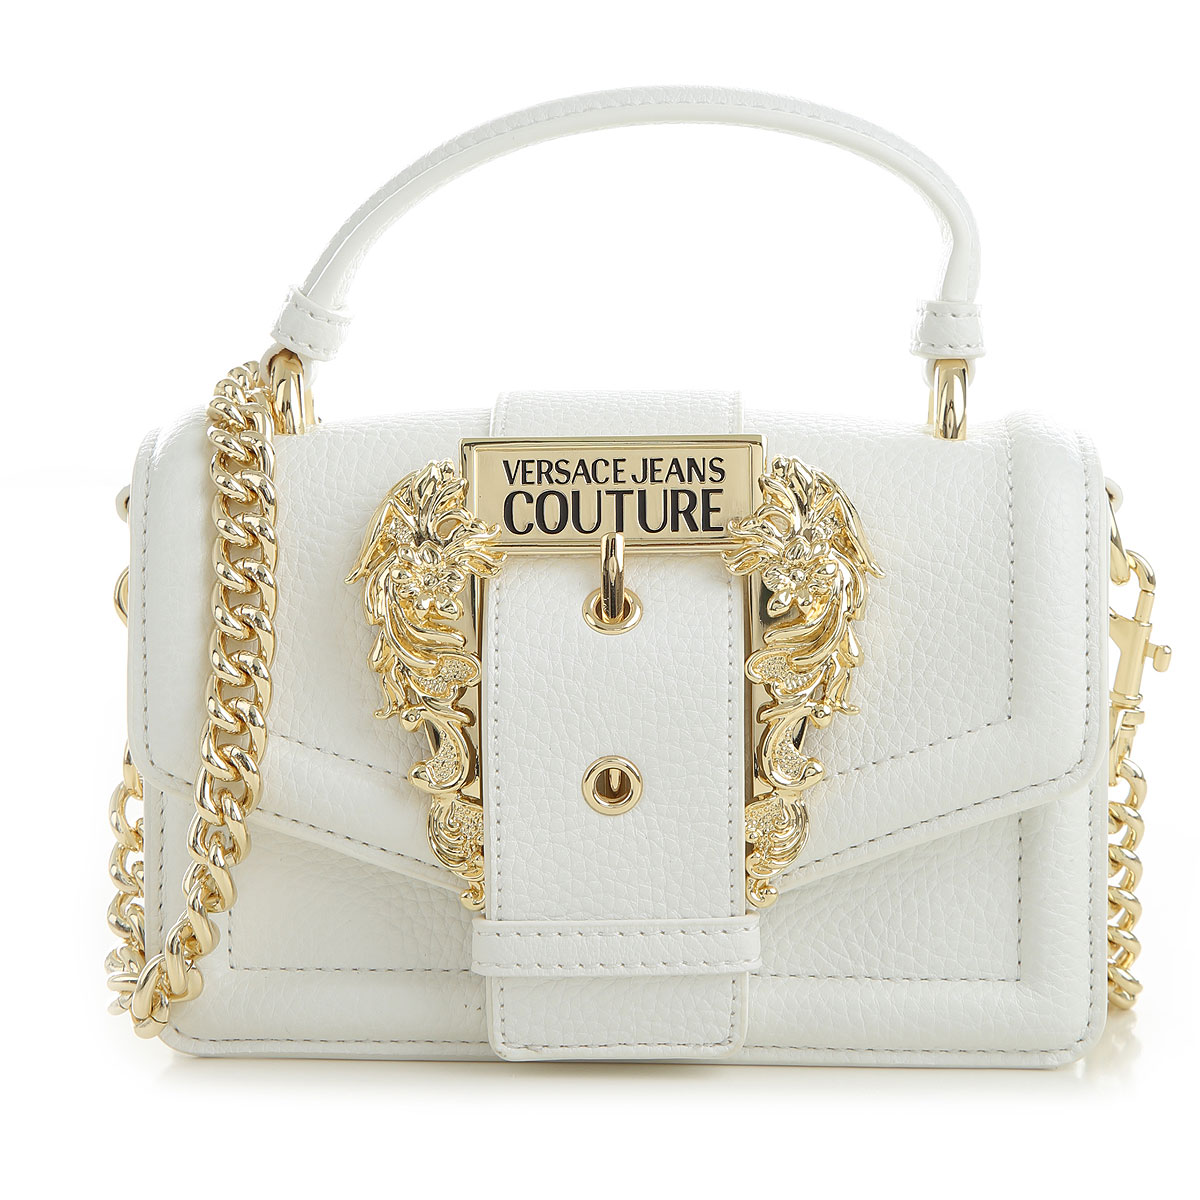 Handbags Versace Jeans Couture , Style code: 74va4bf6-zs413-003